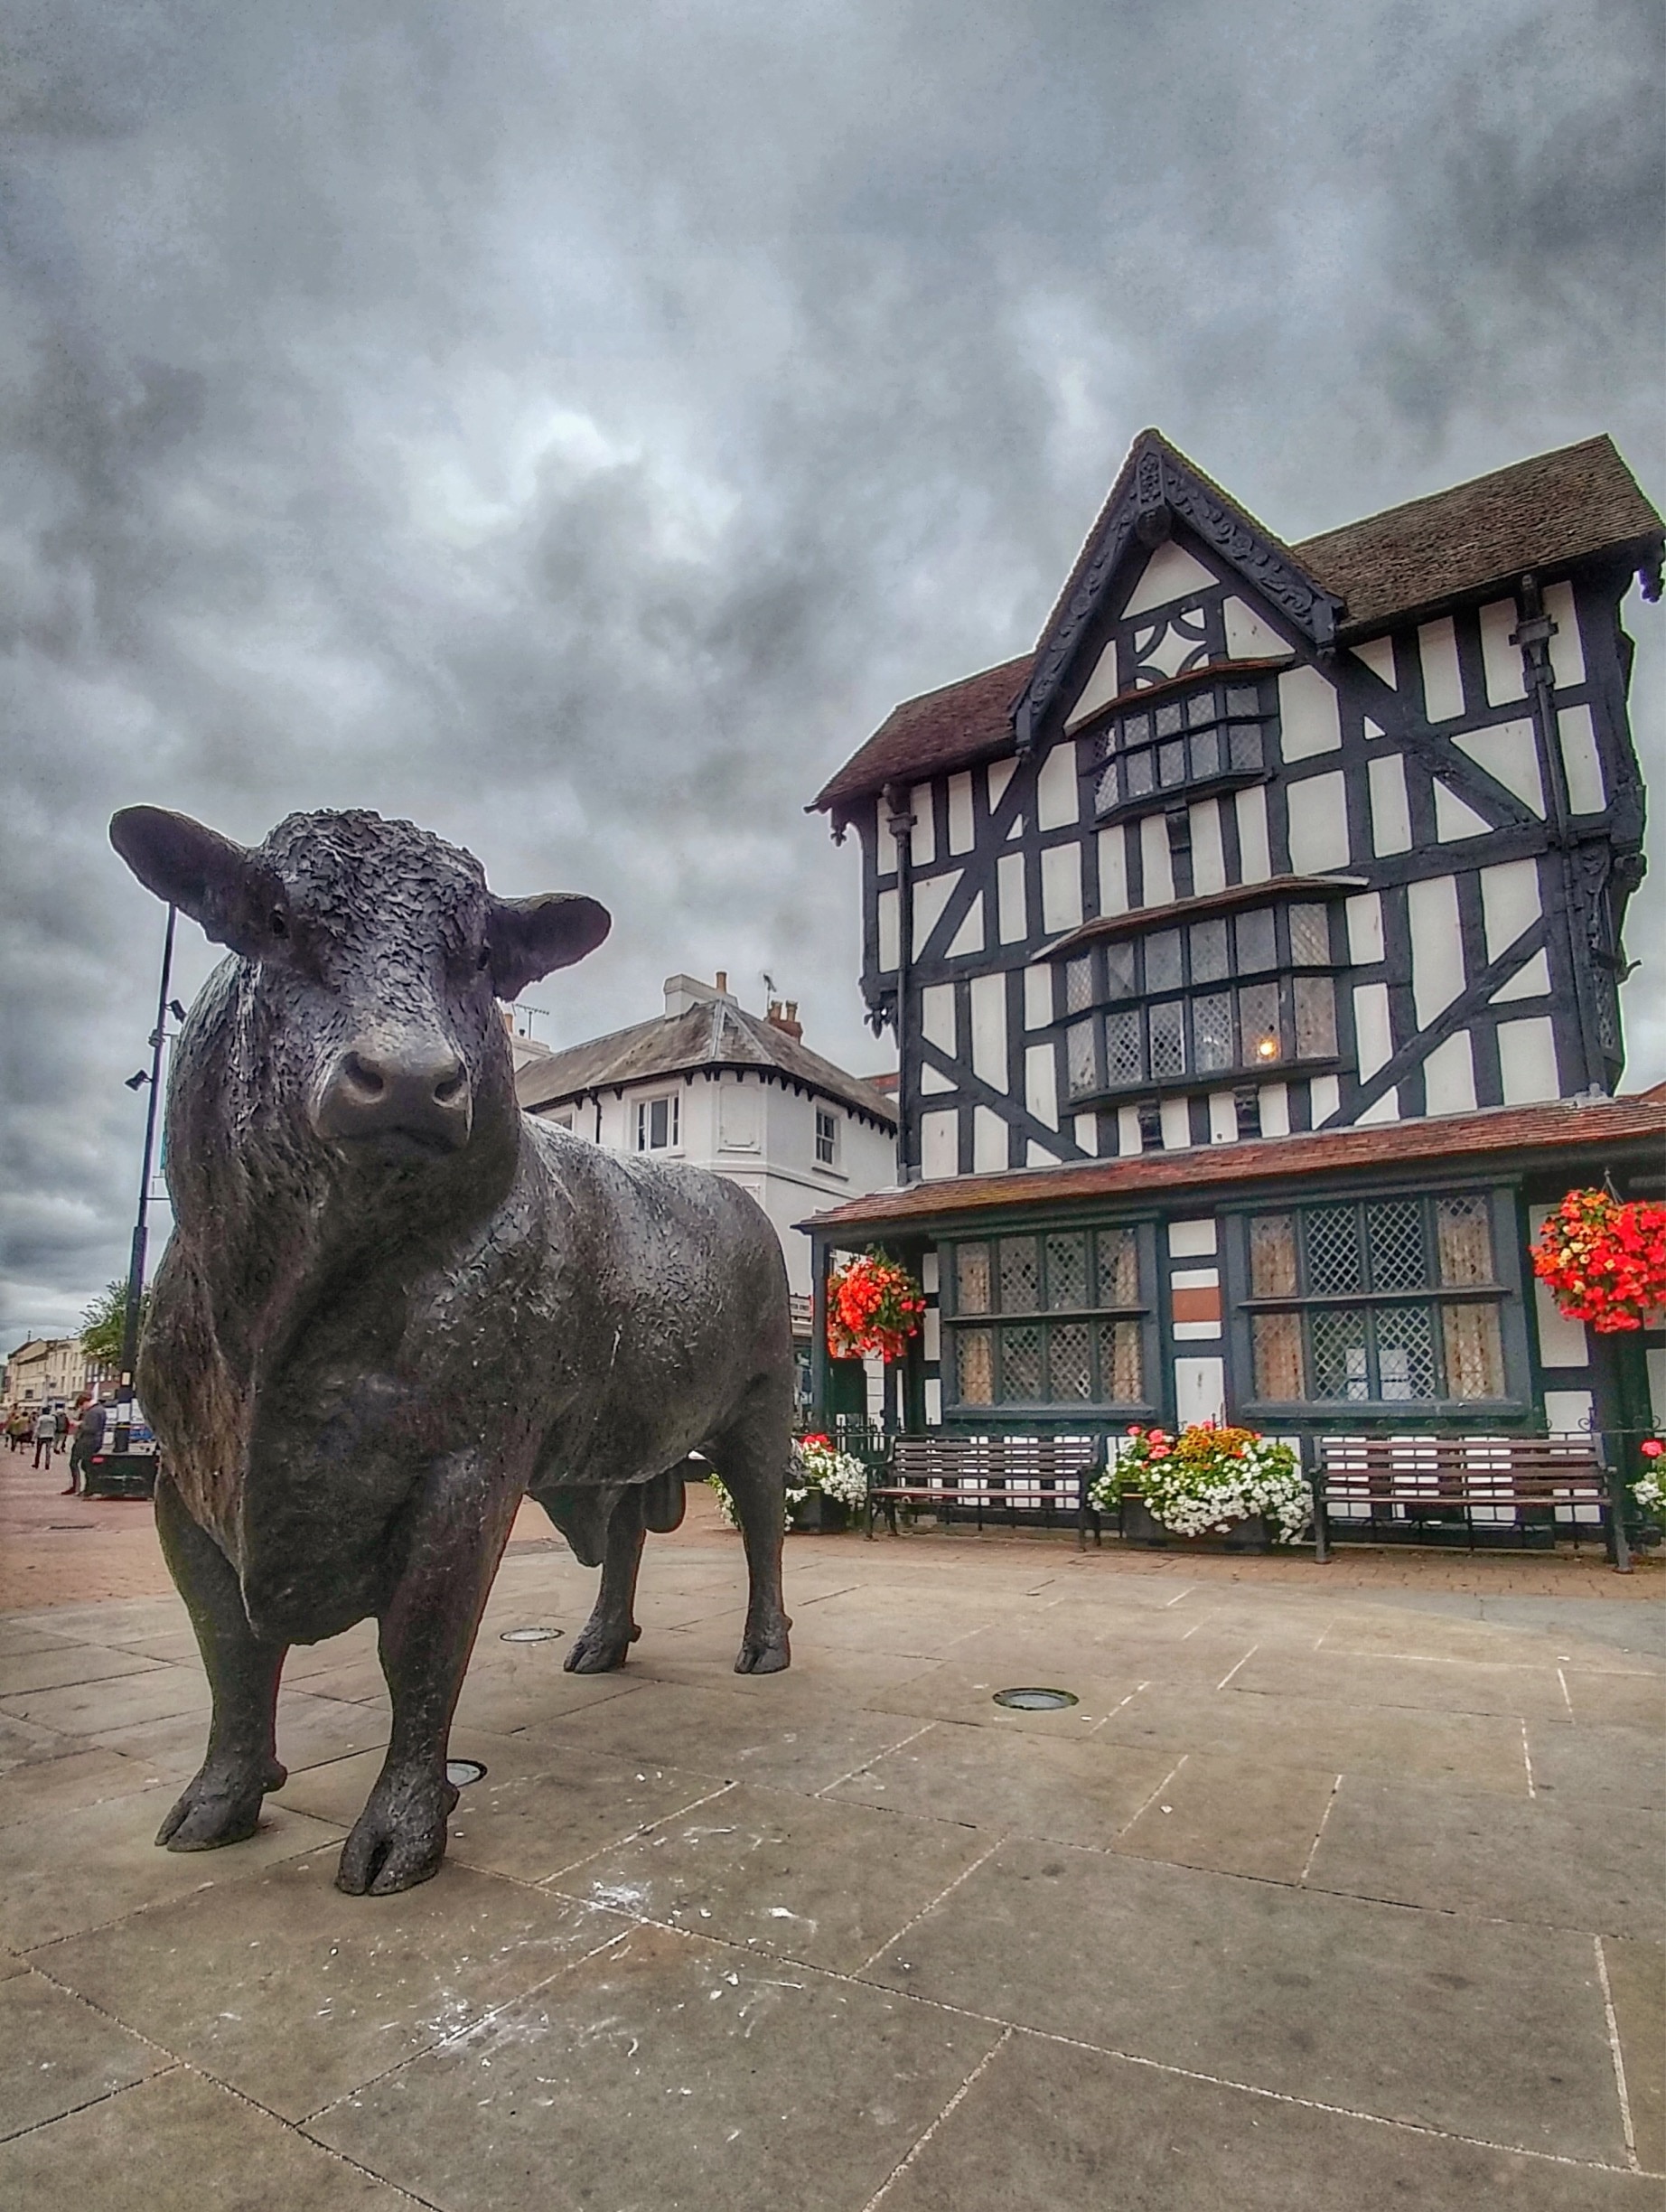 The Black and White House Museum is a well-preserved half-timbered Jacobean building in the centre of Hereford. It was built in 1621 as part of Butchers' Row. In 1816, other buildings on the row started to be demolished, and, now, Old House is the only remaining house in the original row. The house has been used by butchers, ironmongers, and bankers during its history.
Wikipedia 
The bull statue situated just outside the Black and White museum is a life sized sculpture of a Hereford bull.